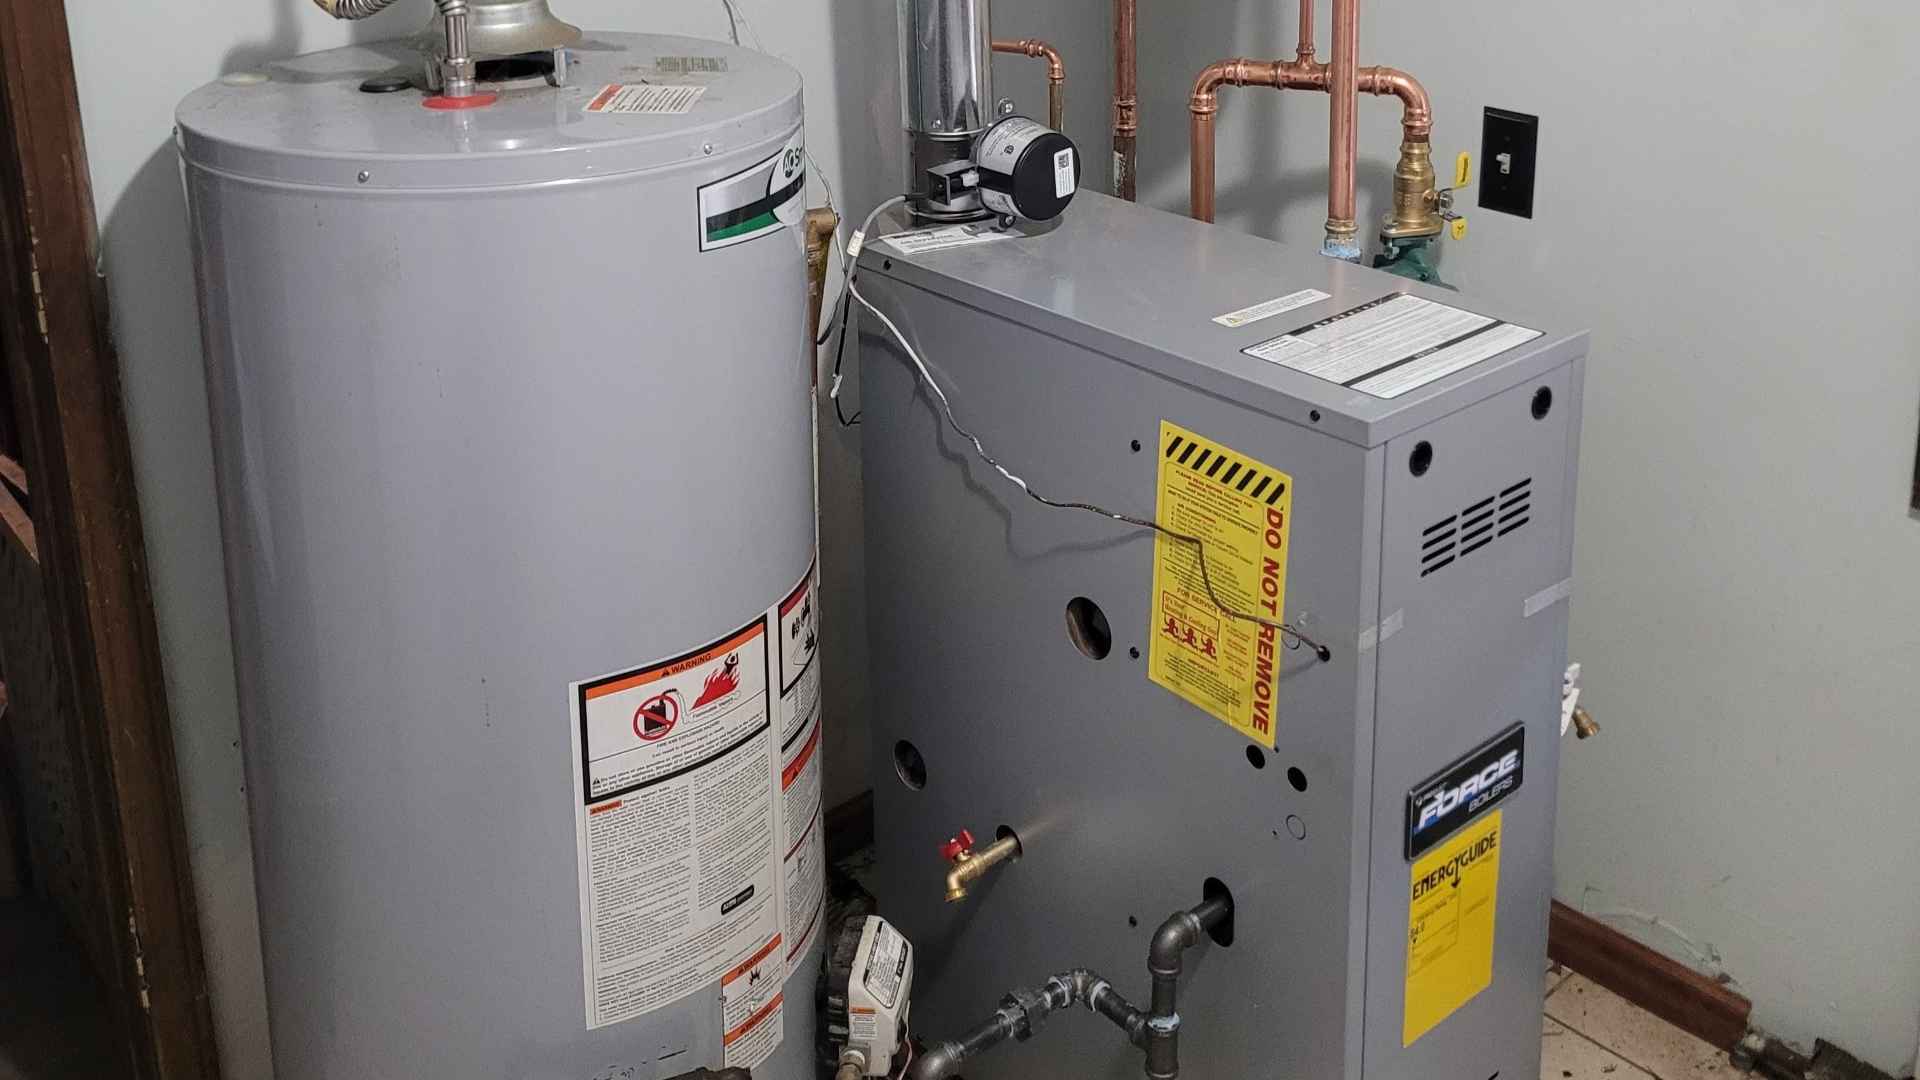 A residential basement with a water heater and a furnace connected to a gas line, both featuring various pipes and labels.